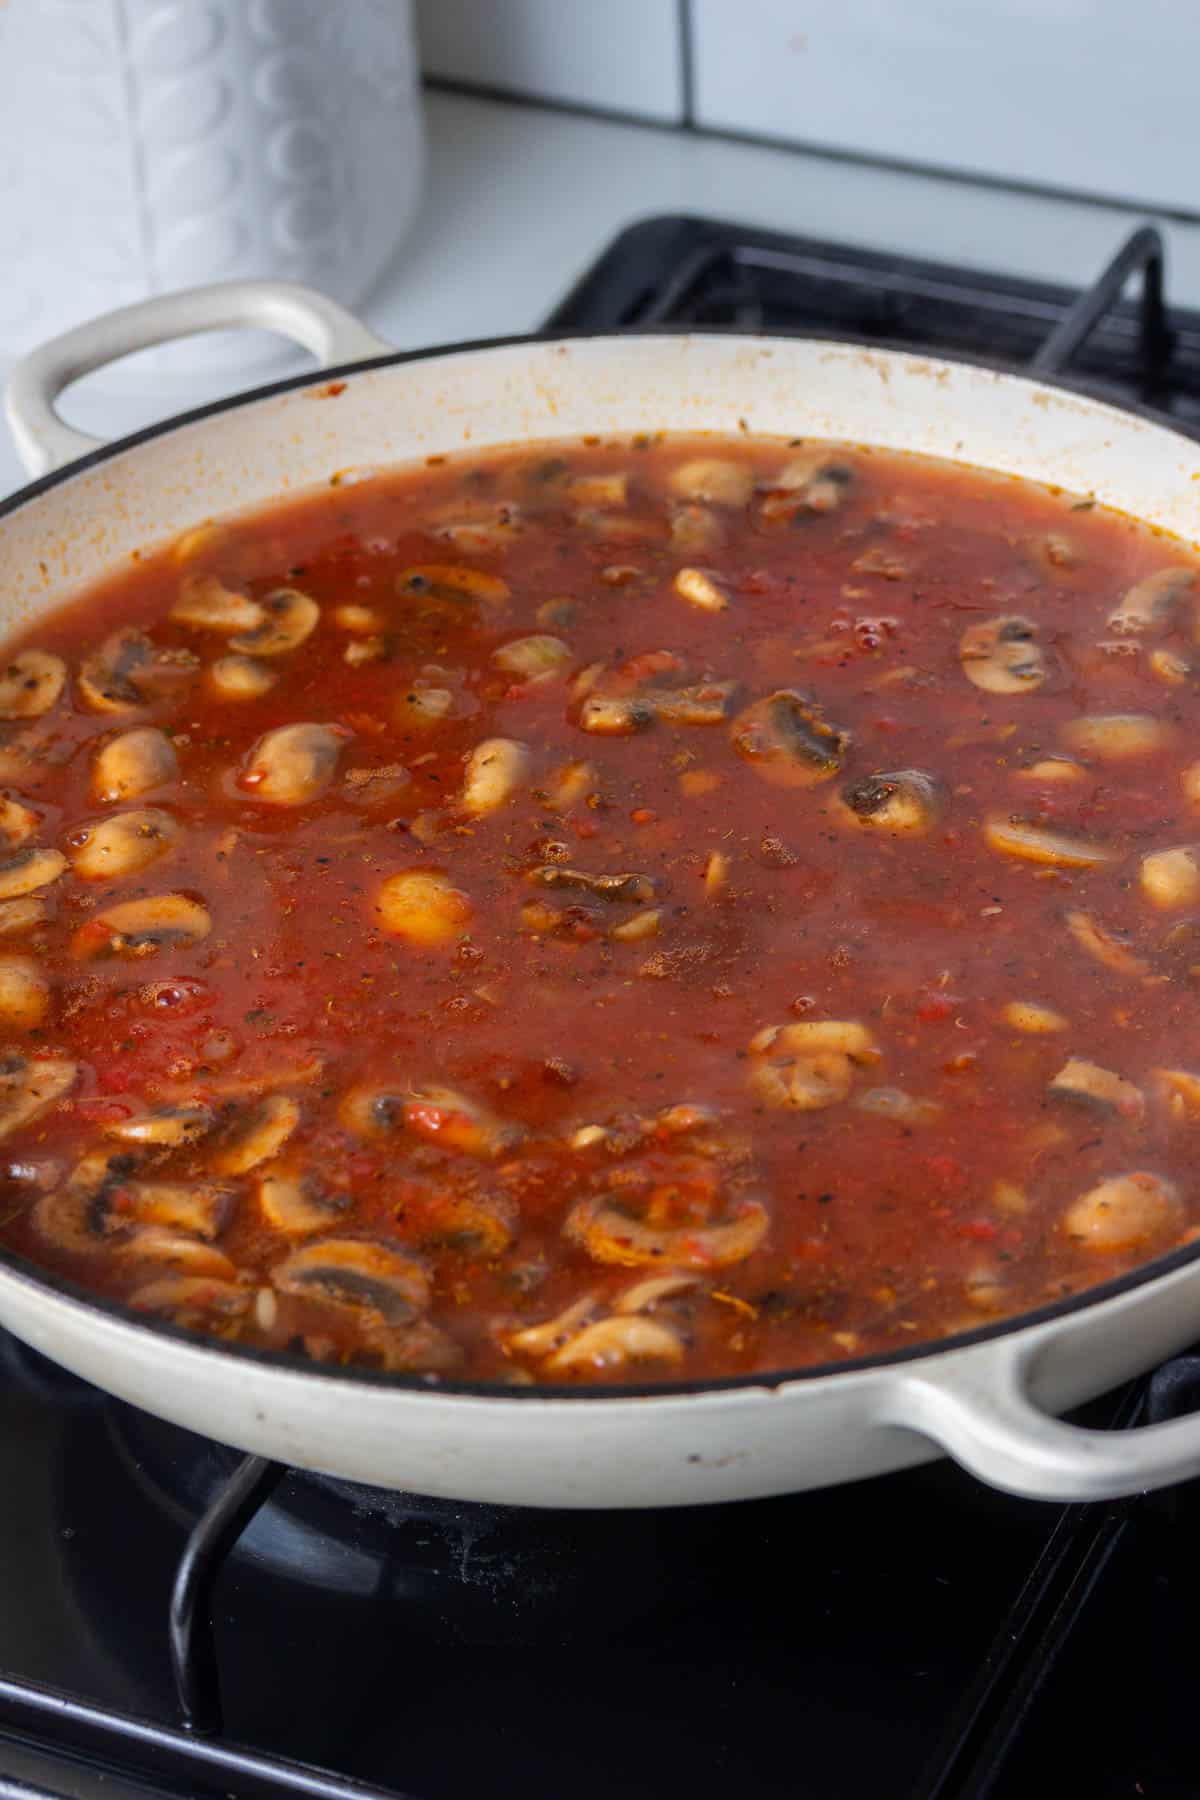 Tomato sauce with mushrooms in a pan